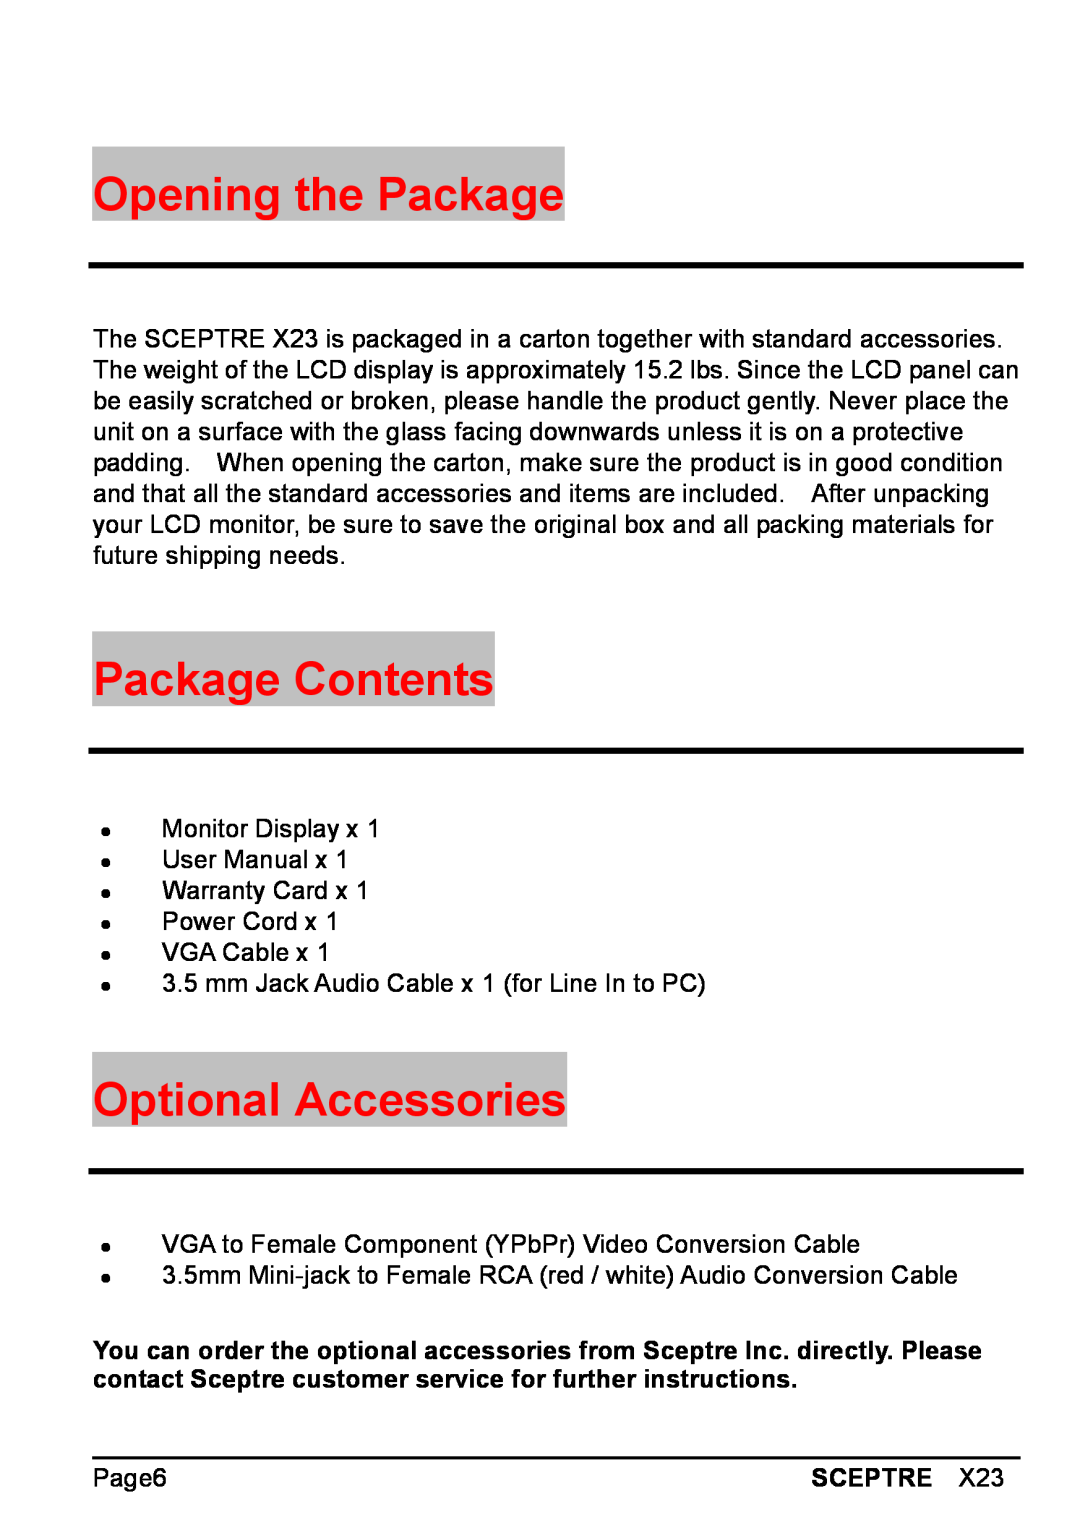 Sceptre Technologies X23 warranty Opening the Package, Package Contents, Optional Accessories 